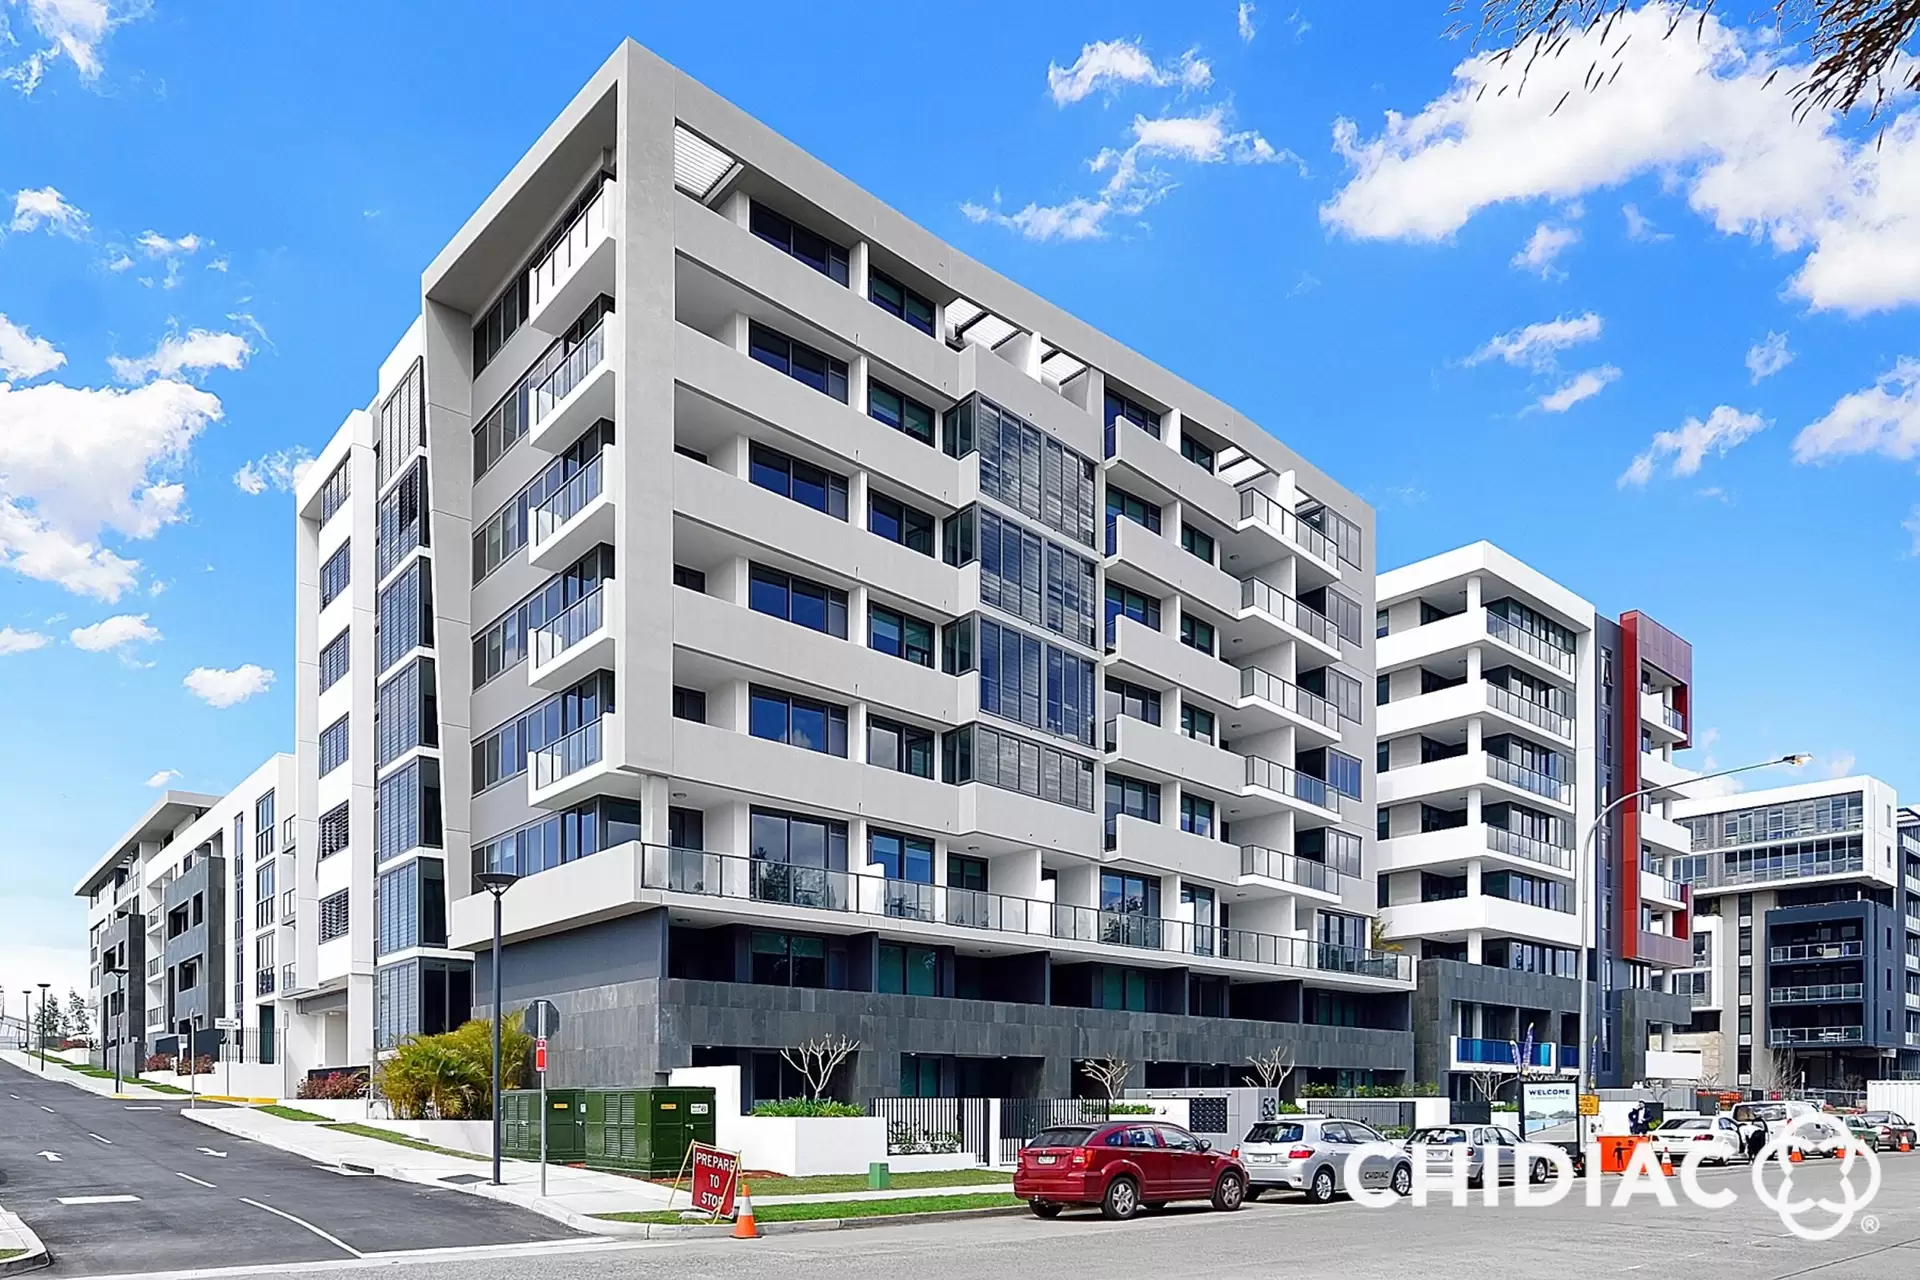 303/5 Waterways Street, Wentworth Point Leased by Chidiac Realty - image 1